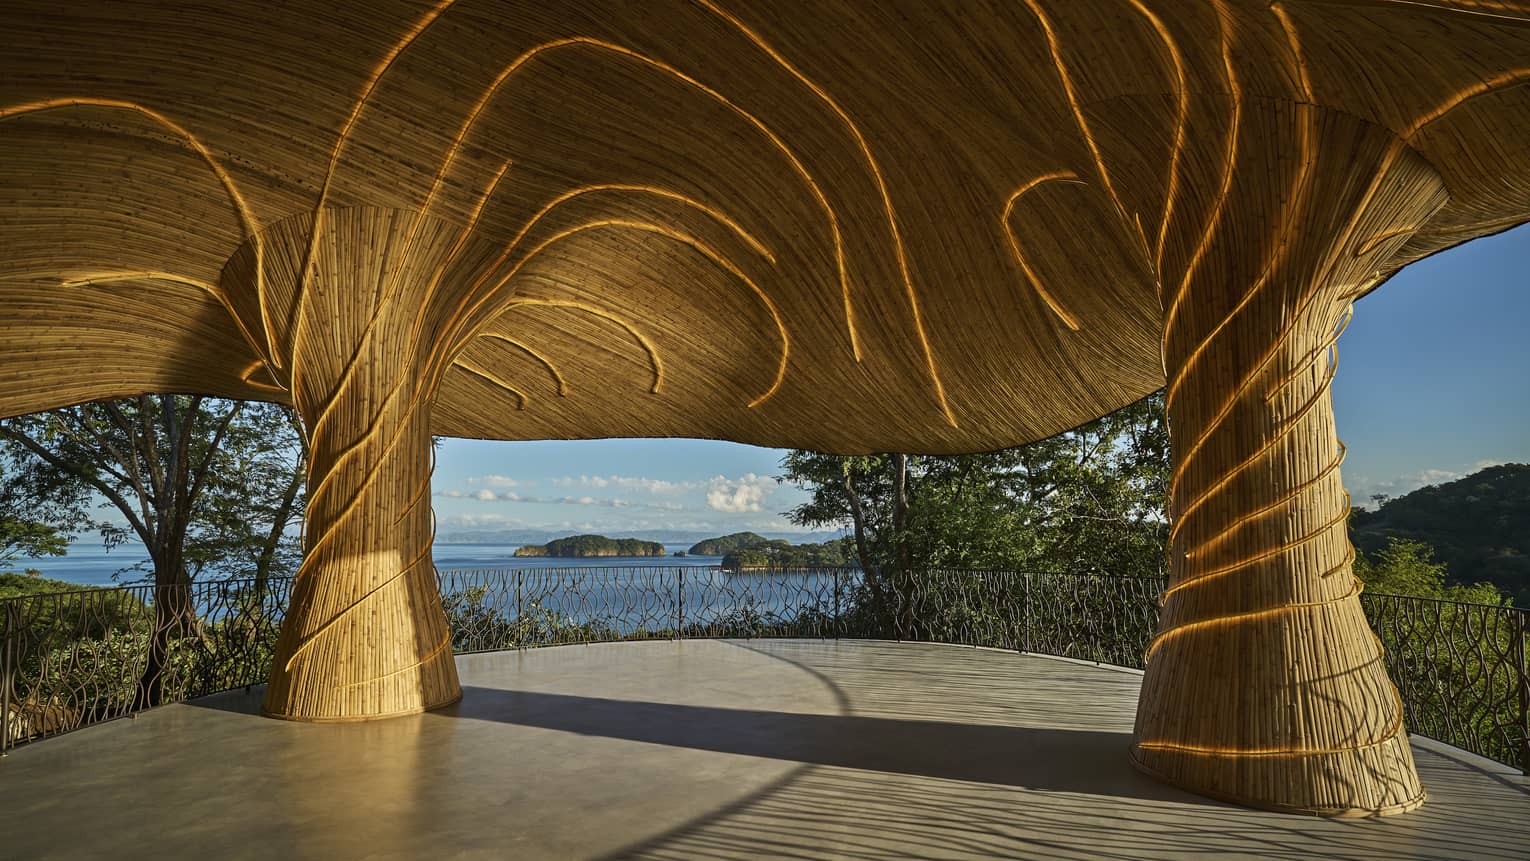 Outdoor shala with a organic and fungal-like roof structure overlooking the ocean